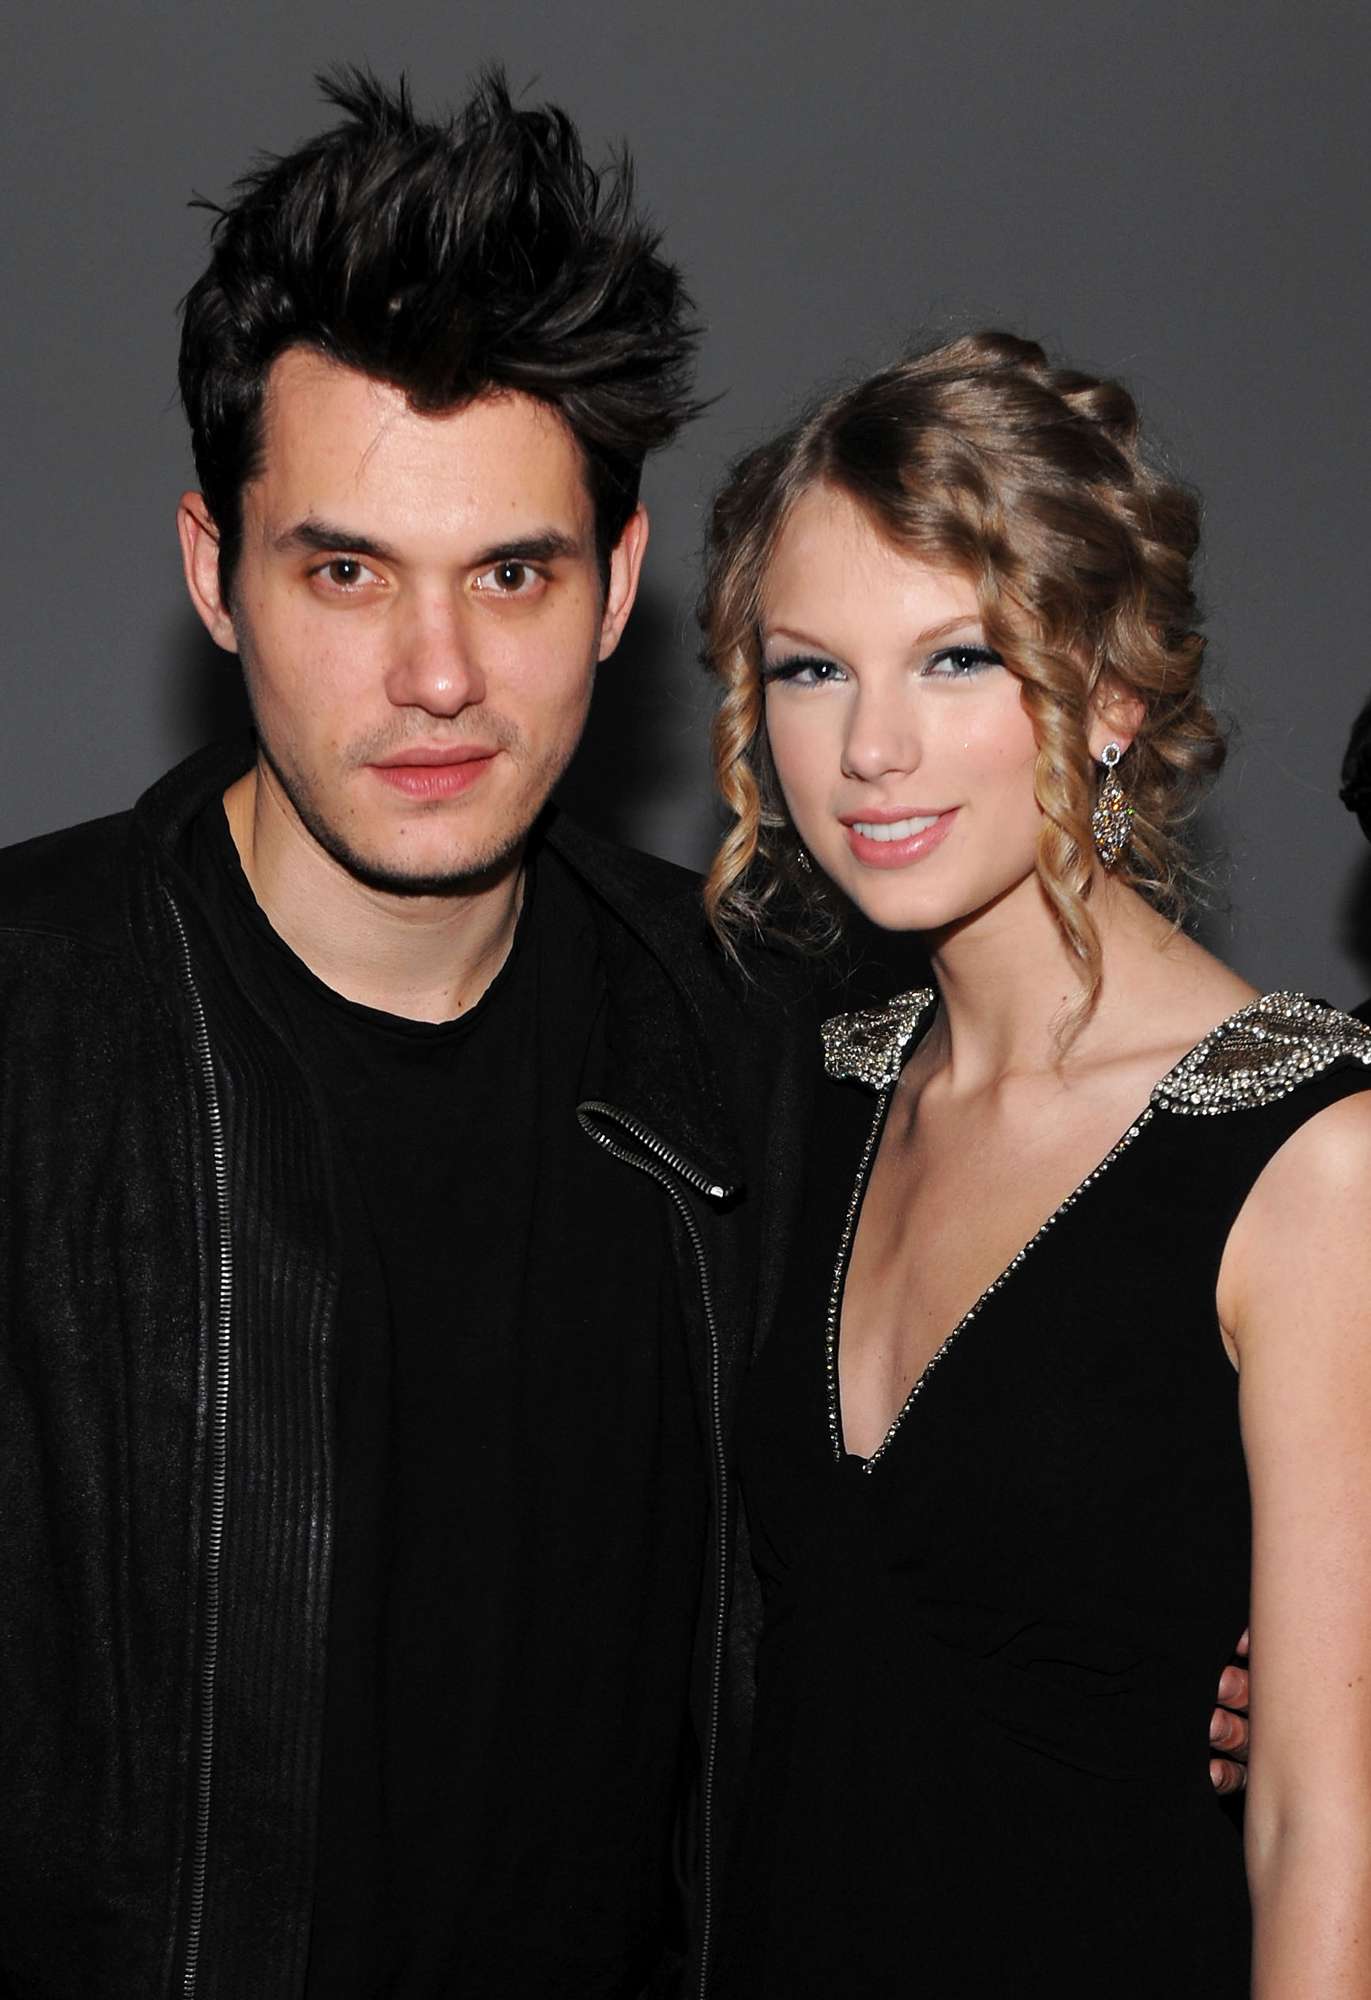 John Mayer (L) and Taylor Swift attend the launch of VEVO, the world's premiere destination for premium music video and entertainment at Skylight Studio on December 8, 2009 in New York City